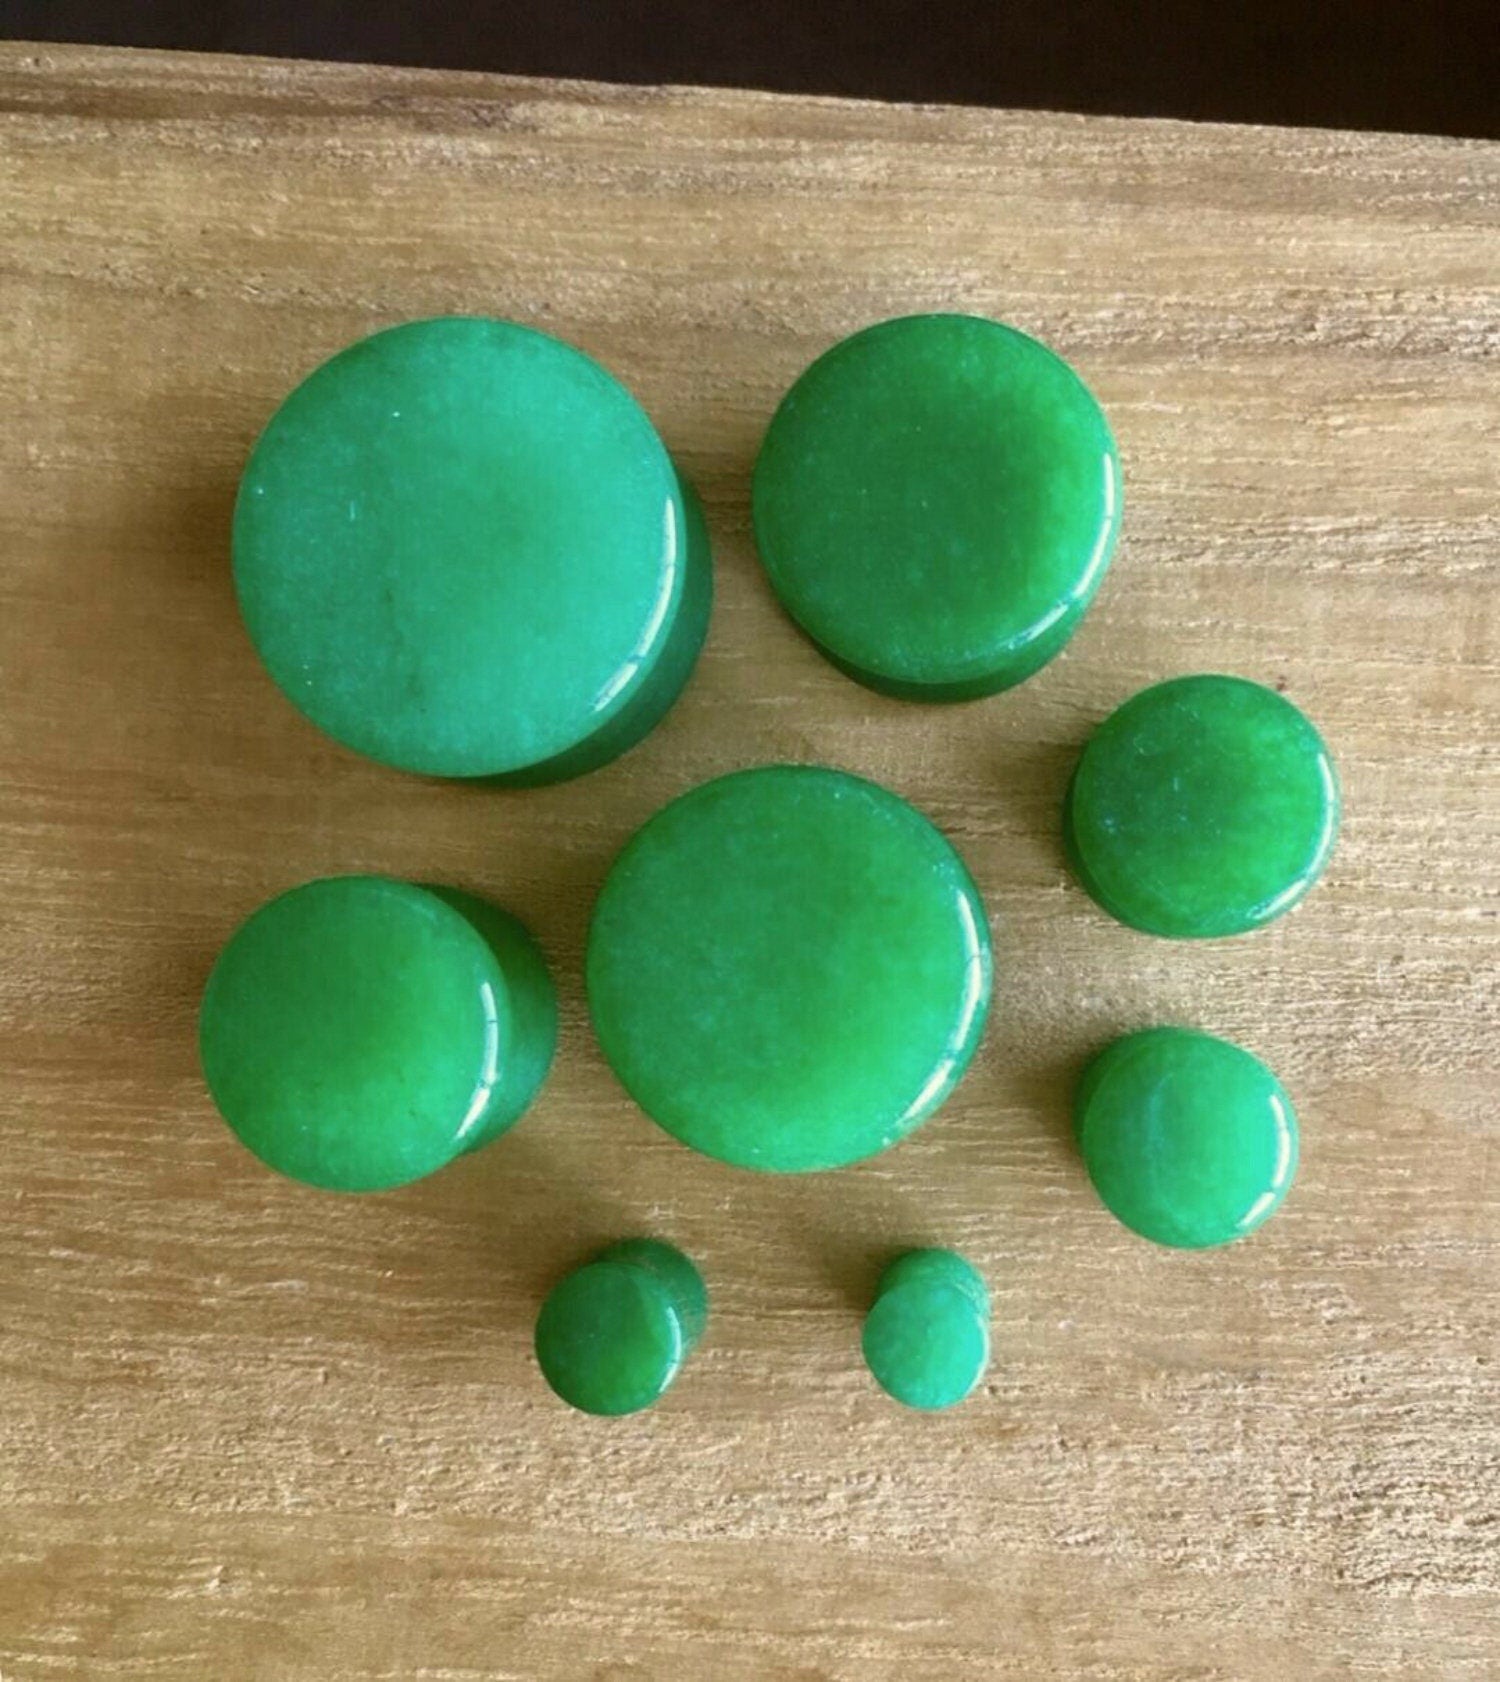 PAIR of Unique Real Green Jade Organic Stone Plugs - Gauges 6g (4mm) up to  5/8